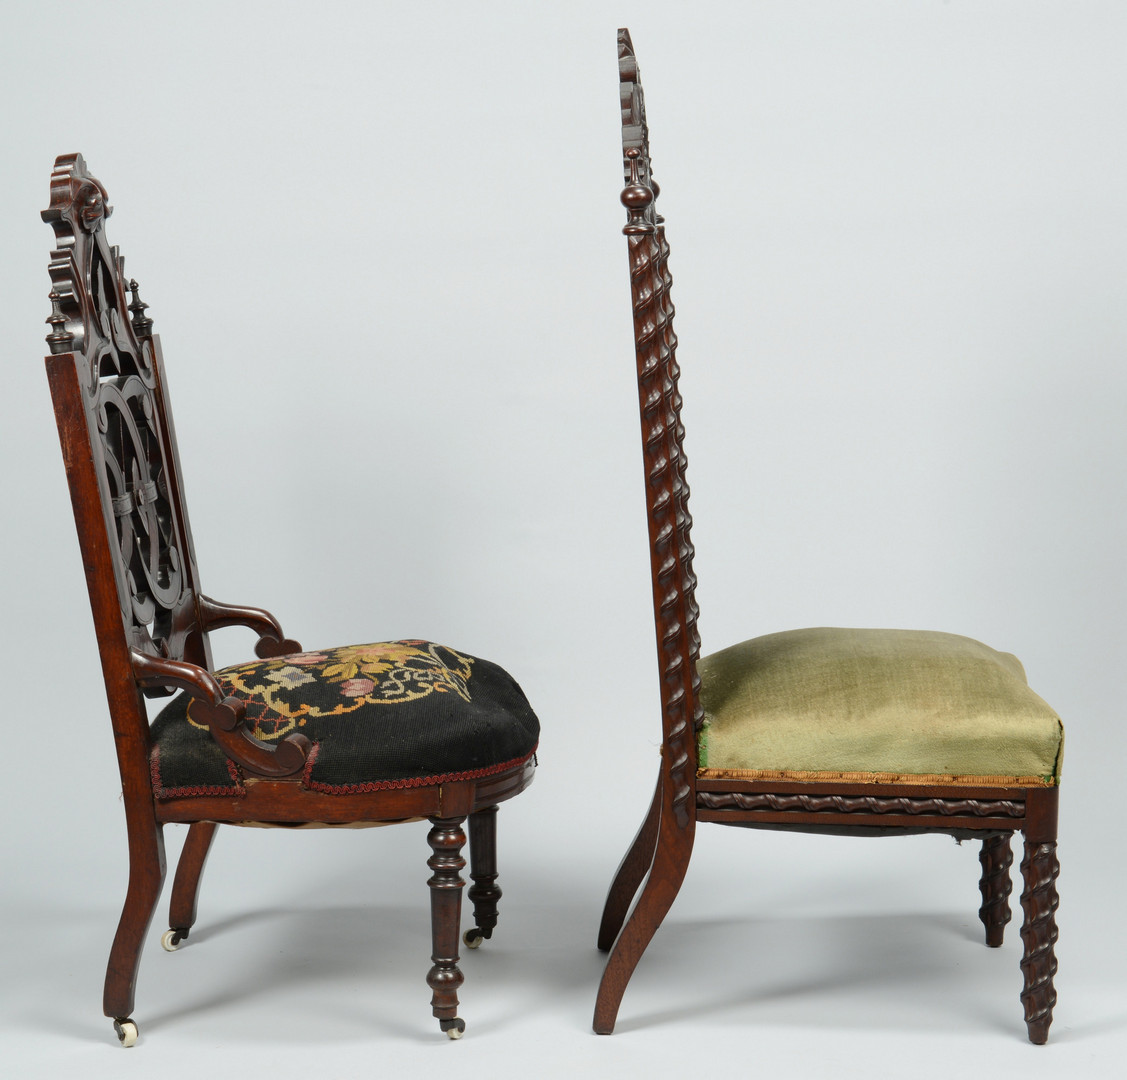 Lot 719: Two Gothic Revival Chairs